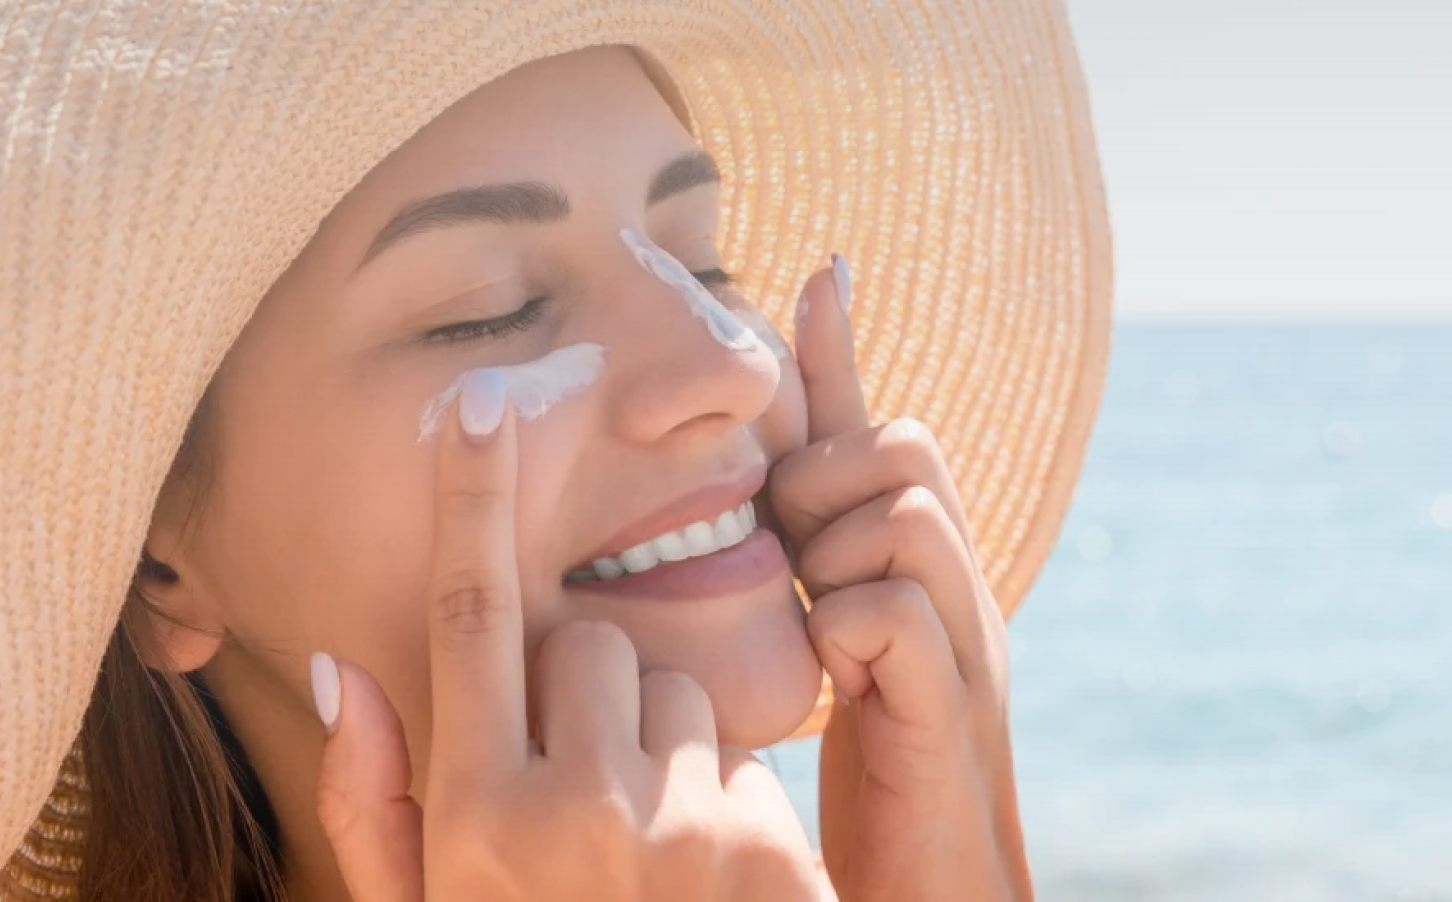 Sun Care] Do these face shields actually protect from UVA/UVB rays or are  they bogus? I saw a dermatologist with one on on Instagram and tik tok and  thought it'd be a